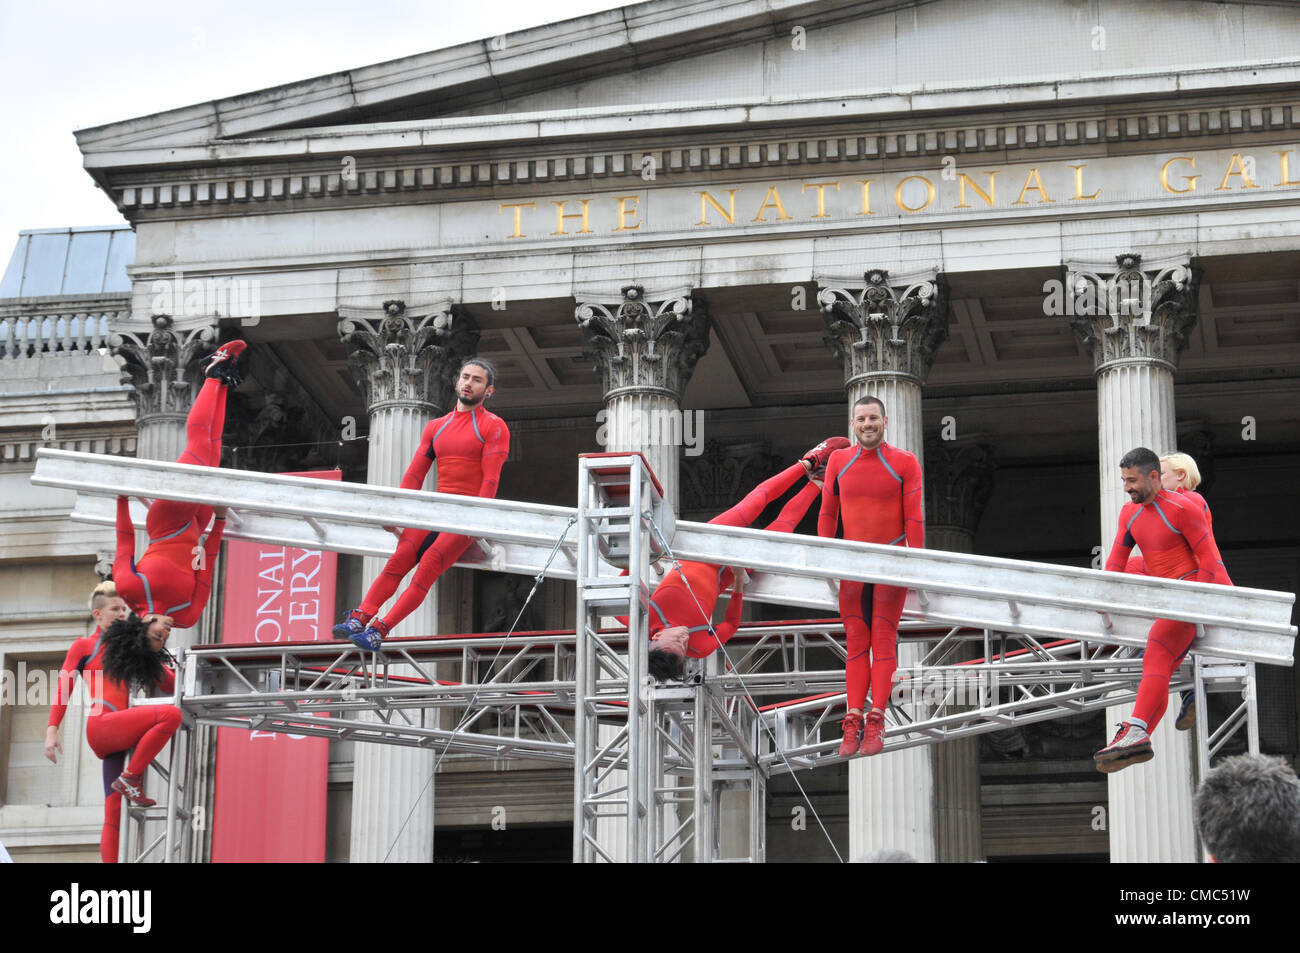 London, UK. 15th July 2012. The performers on the spinning ladder. One Extraordinary Day, Surprises: Streb. Choreographer Elizabeth Streb and her New York dance company 'Action Heroes' with their performance ASCENSION in front of the National Gallery. Stock Photo